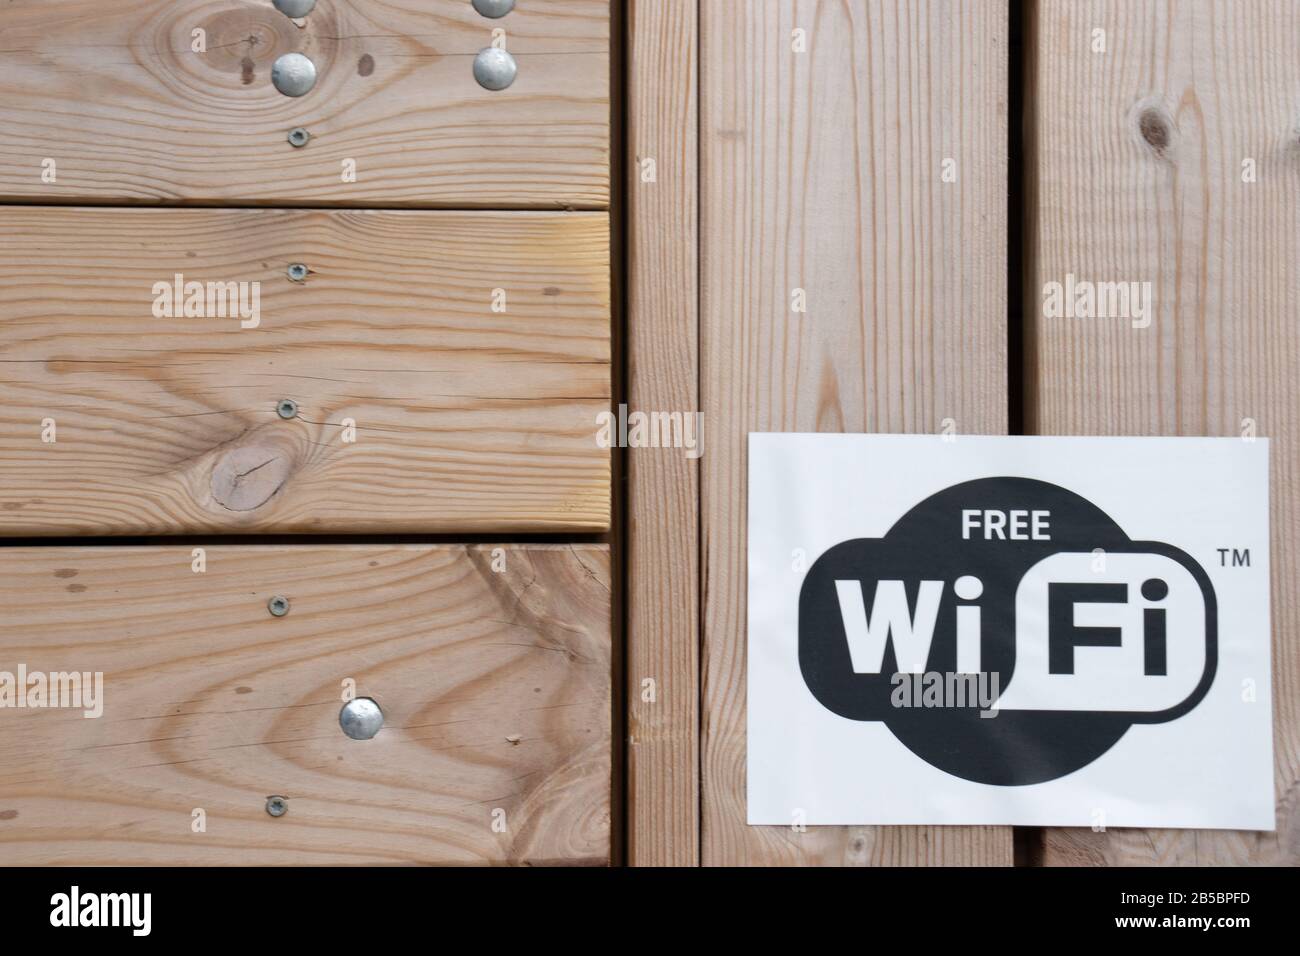 Helsinki, Finland - 3 March 2020: WiFi icon on wooden background , Illustrative Editorial Stock Photo